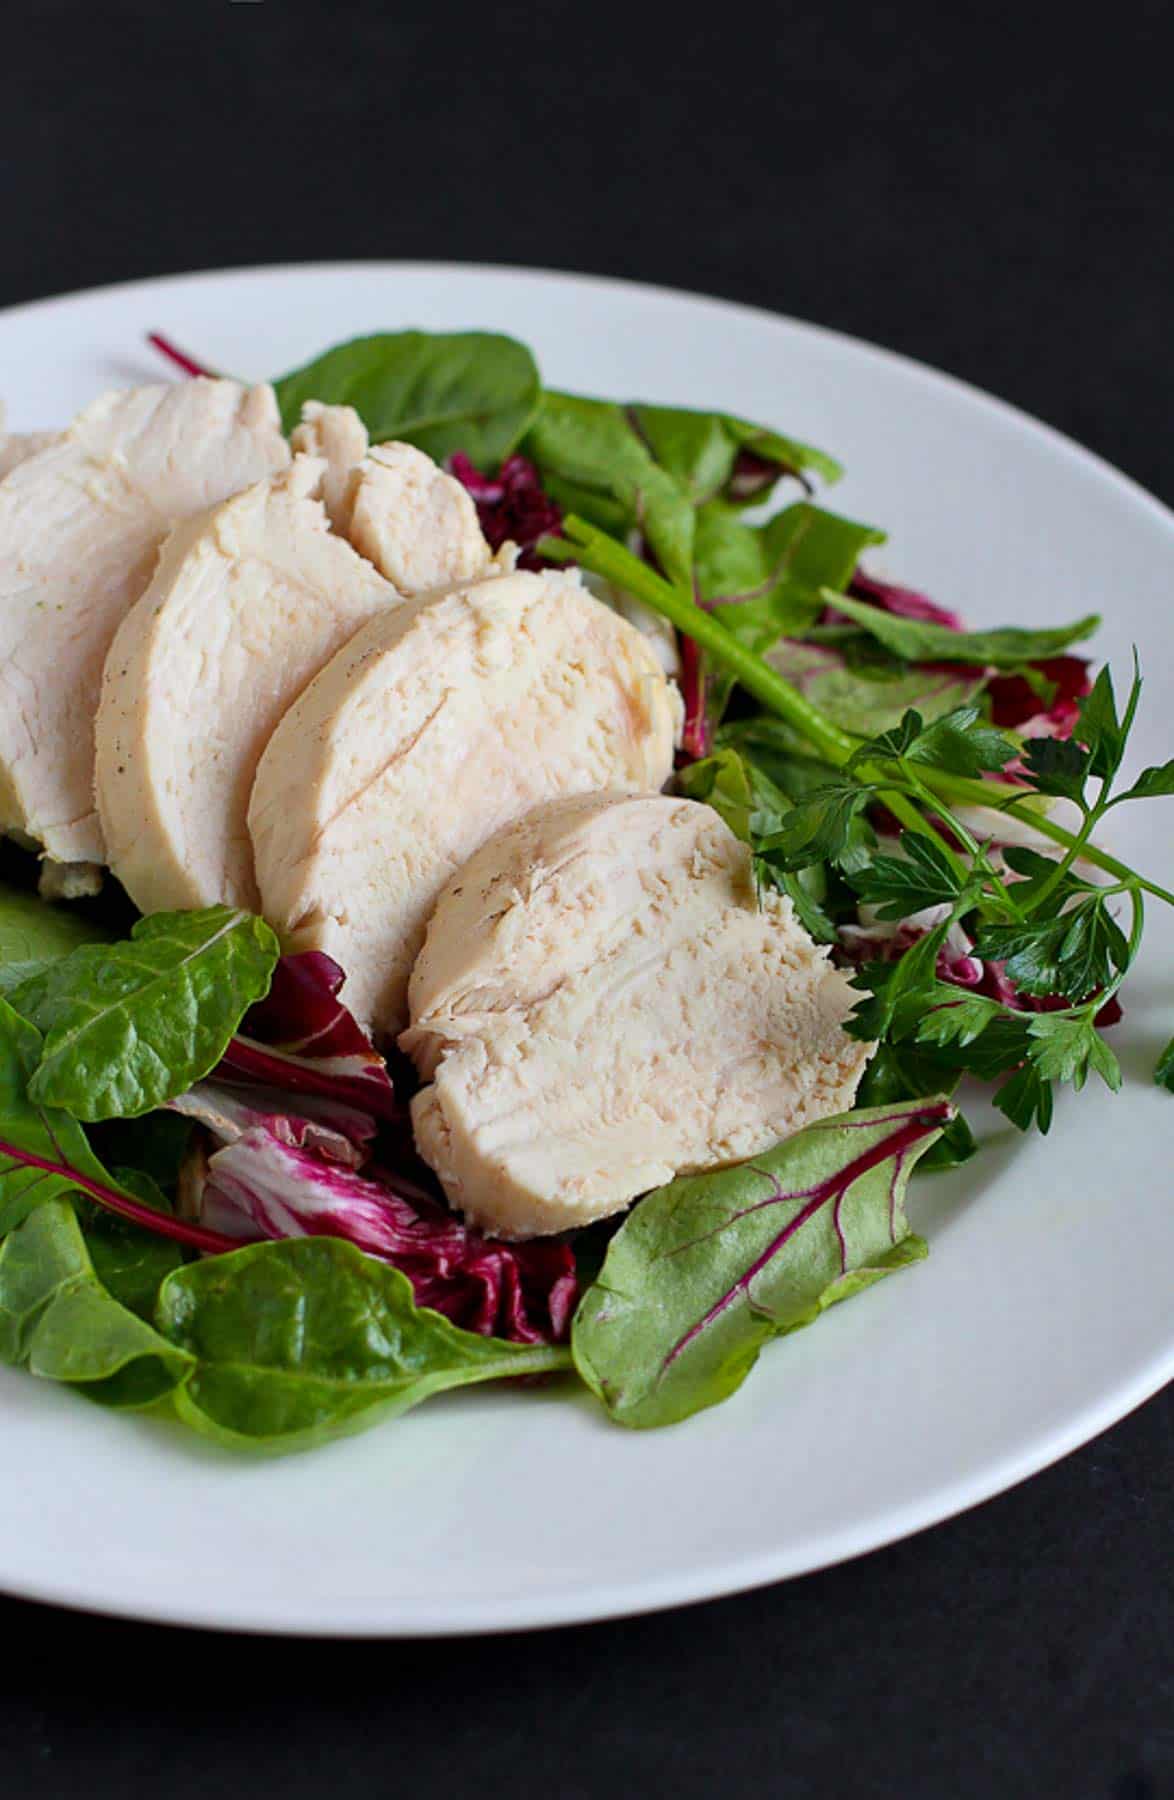 Sliced chicken breast and mixed greens on a white plate.